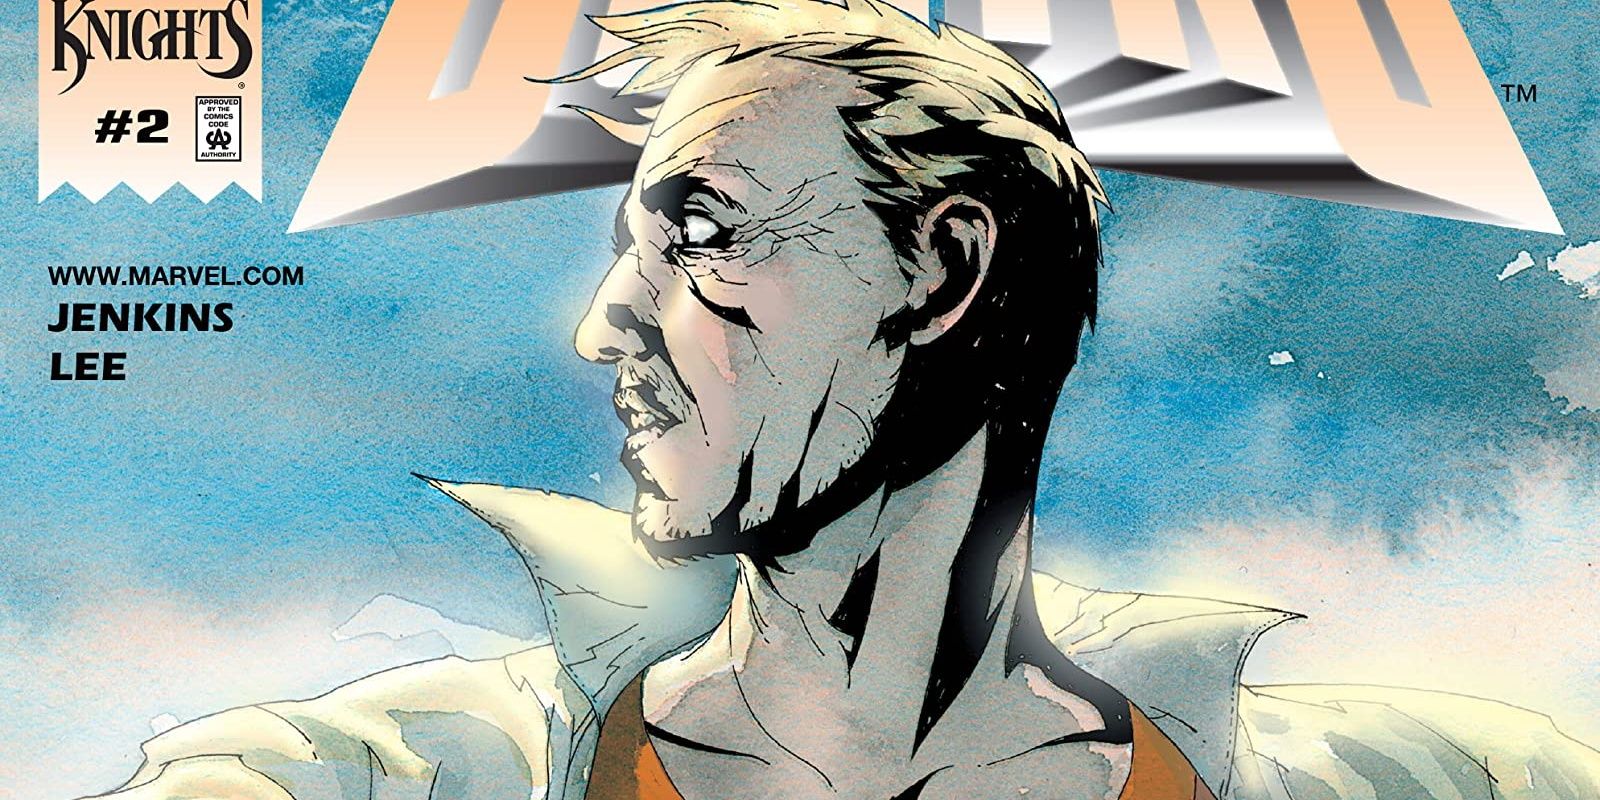 A middle-aged, fatigued Sentry in Marvel Comics